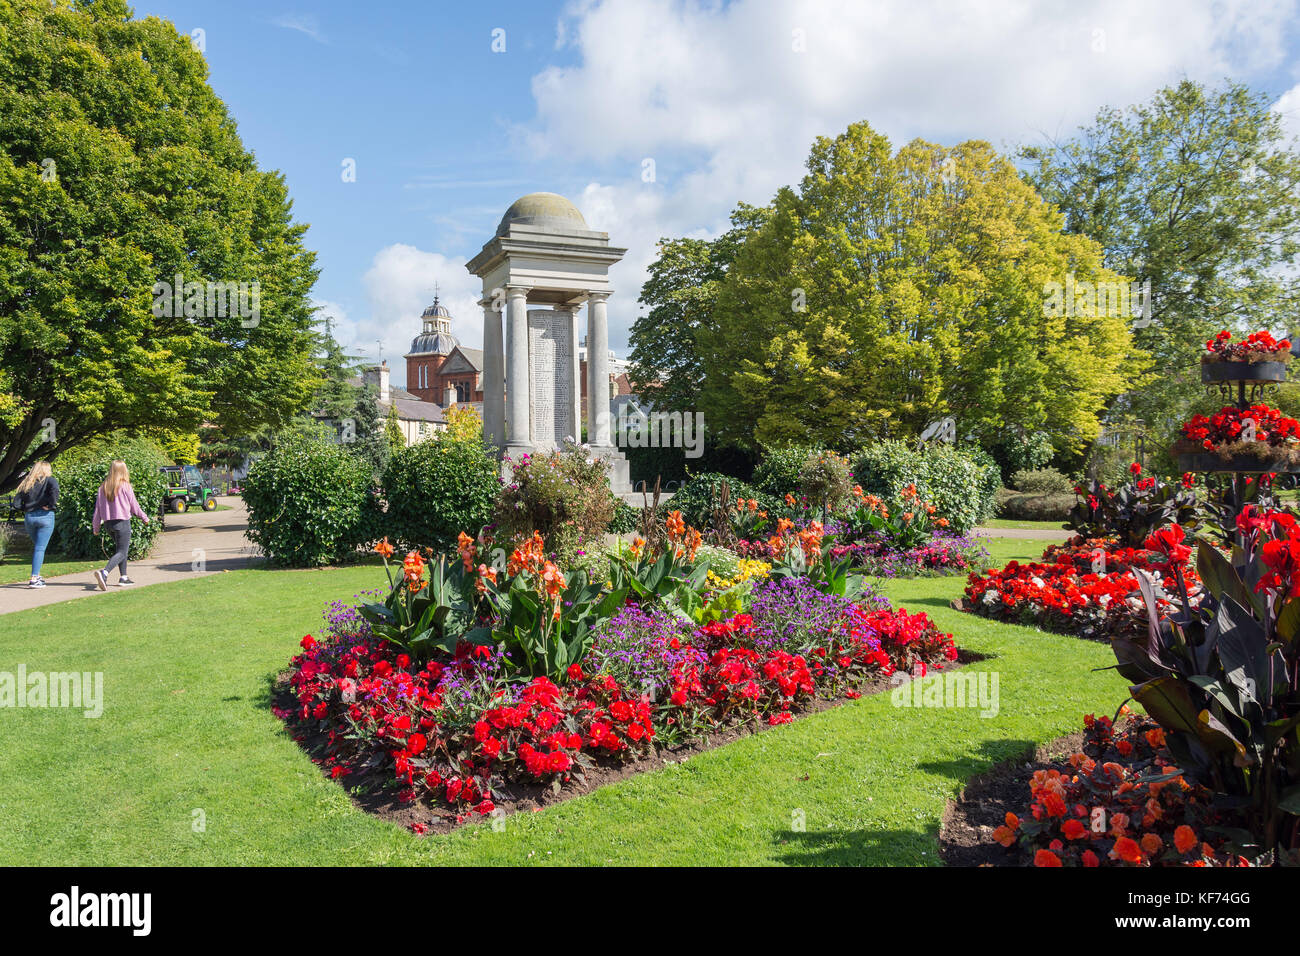 Rose beds and War Memorial in Vivary Park, Taunton, Somerset, England, United Kingdom Stock Photo